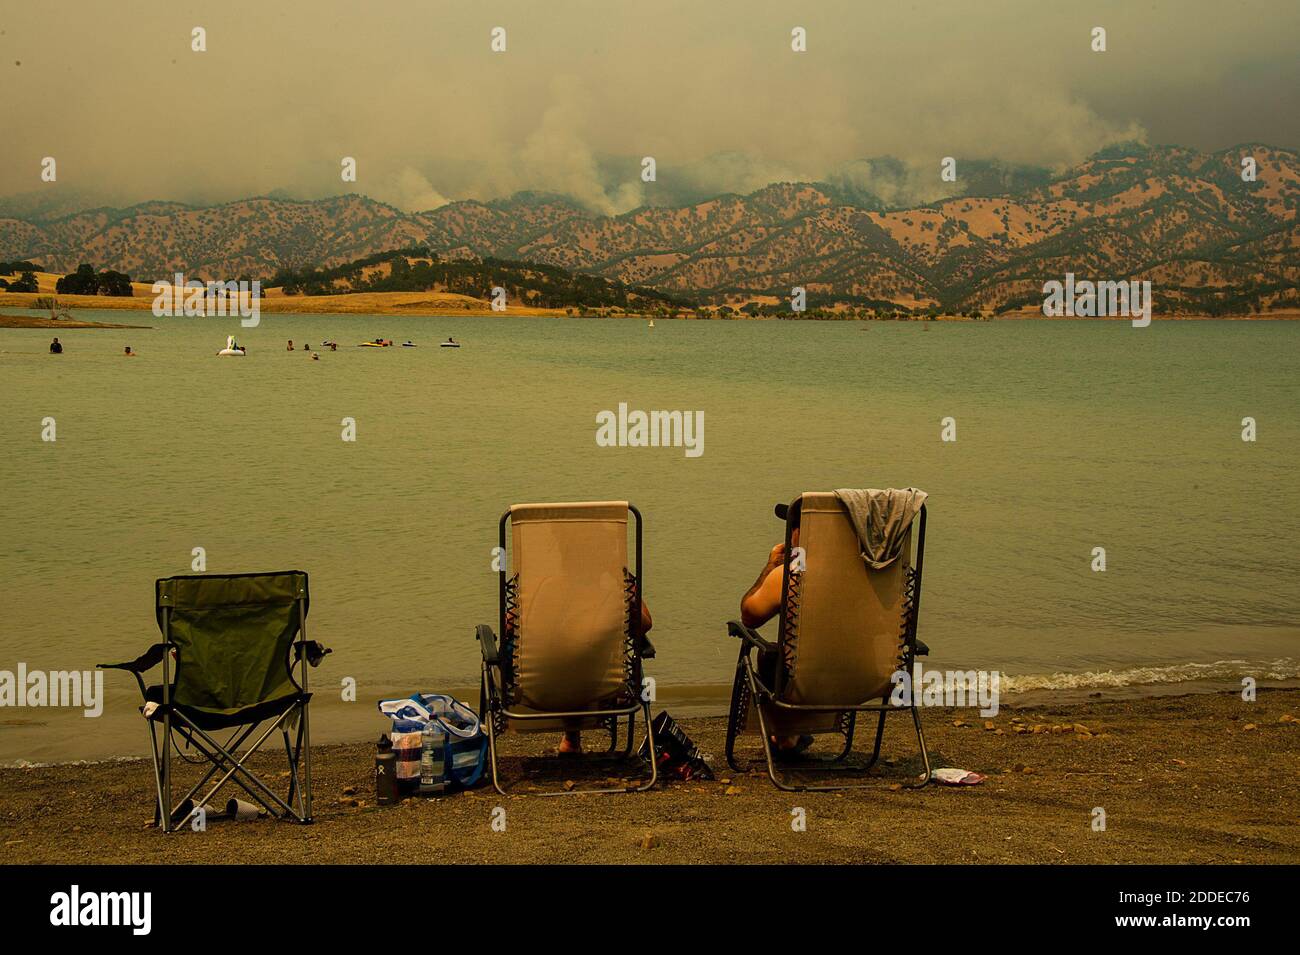 NO FILM, NO VIDEO, NO TV, NO DOCUMENTARY - The County Fire burns west toward Lake Berryessa and has burned more than 22,000 acres without containment on Sunday, July 1, 2018 in Capay Valley, CA, USA. Photo by Paul Kitagaki Jr./Sacramento Bee/TNS/ABACAPRESS.COM Stock Photo